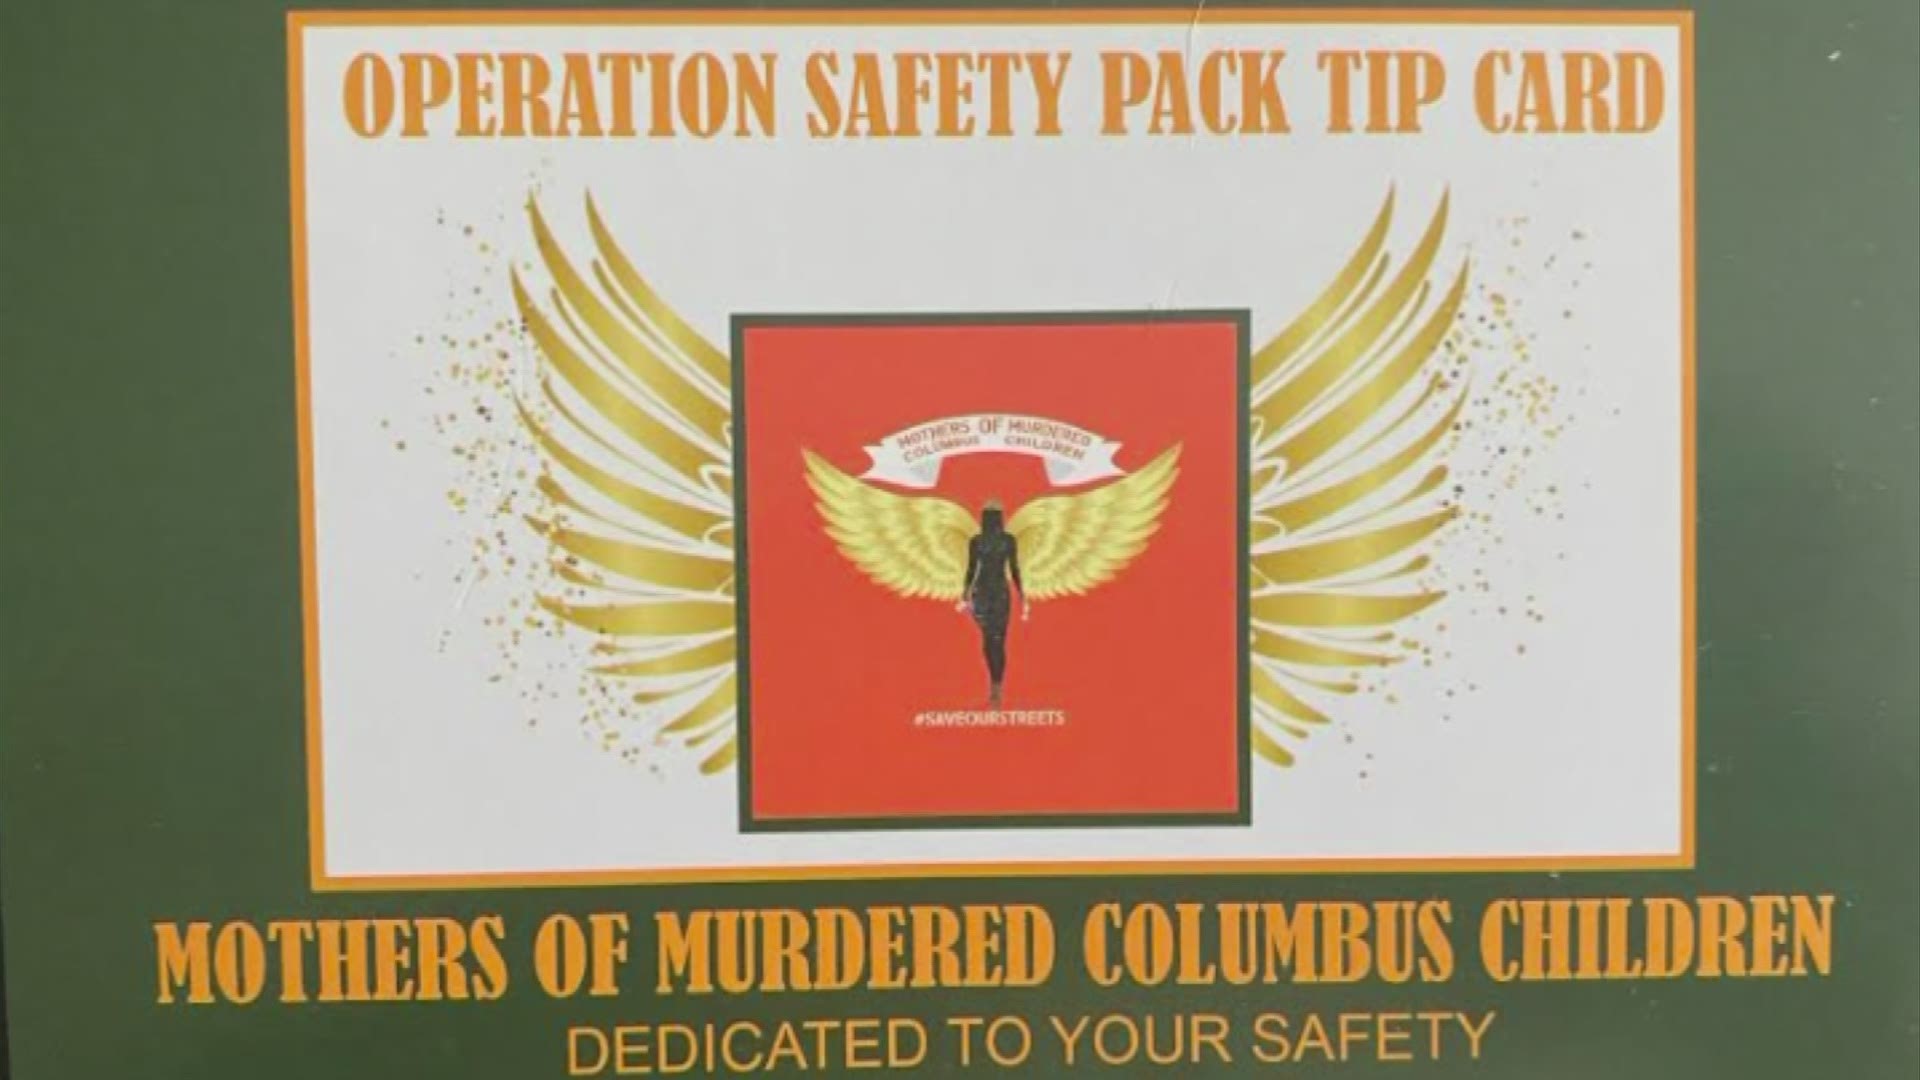 The goal of Operation Safety Packs is to protect women, especially seniors, while they’re out and about.